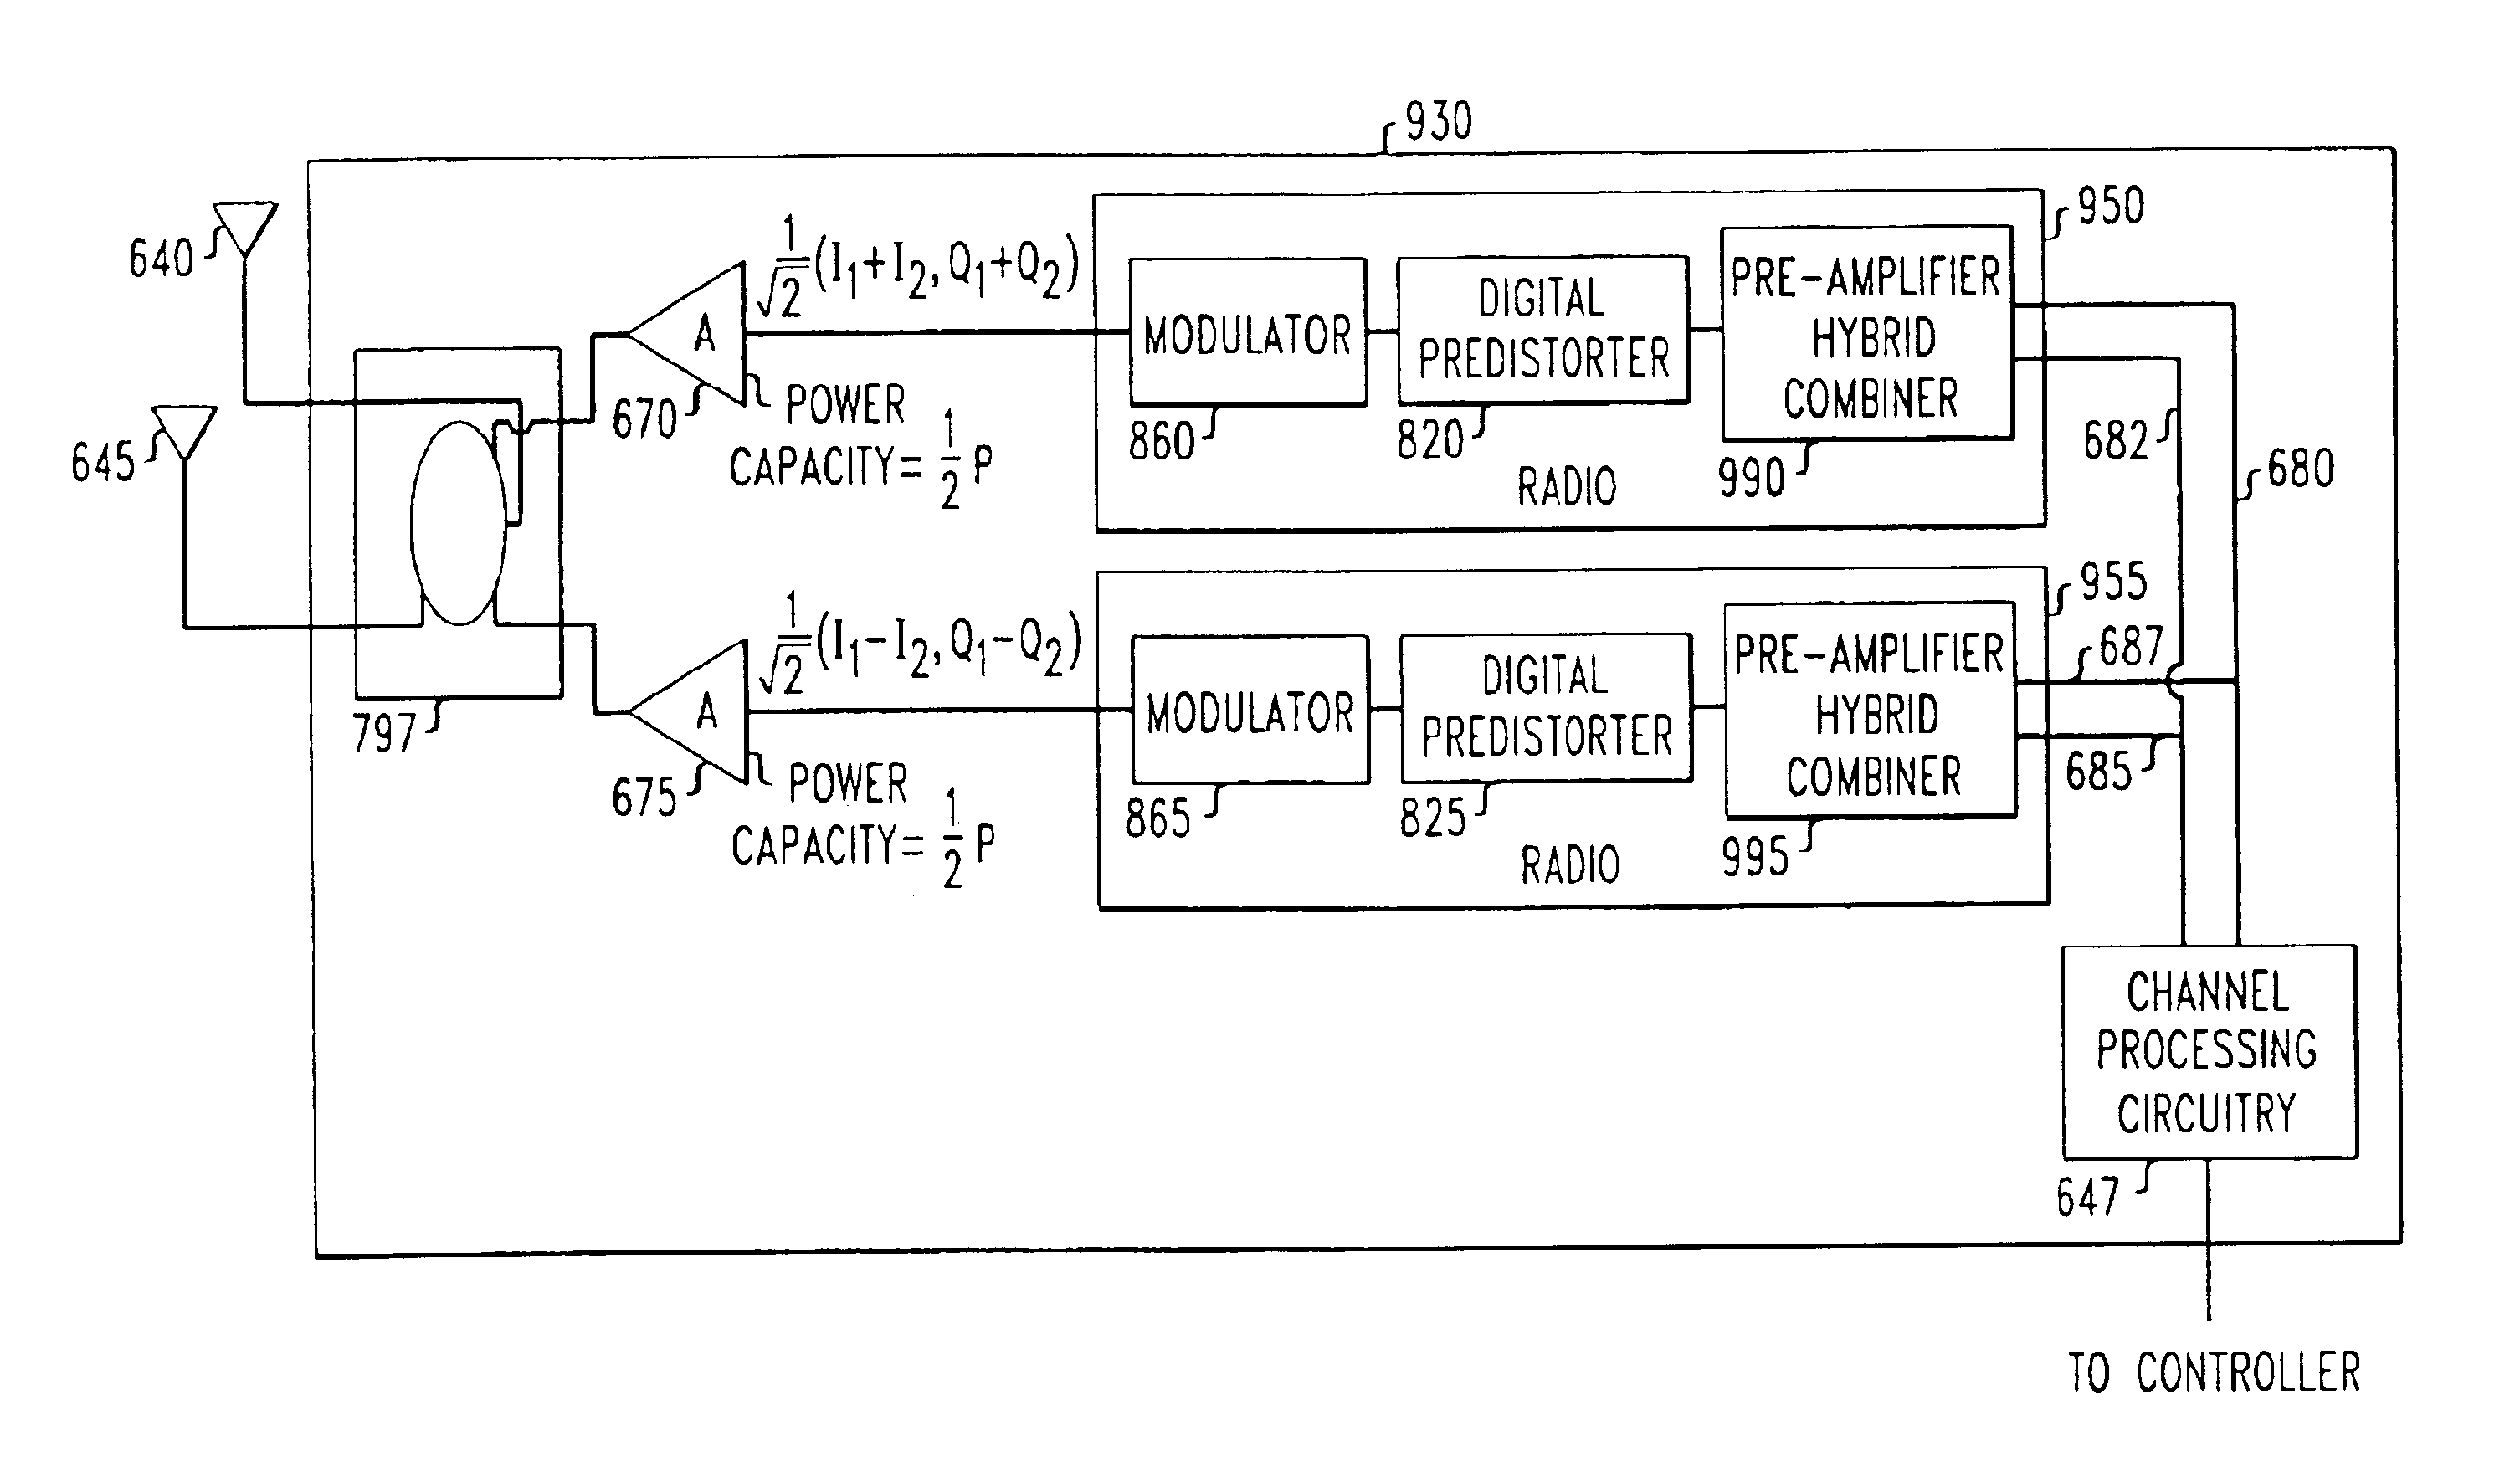 Power amplifier sharing in a wireless communication system with amplifier pre-distortion